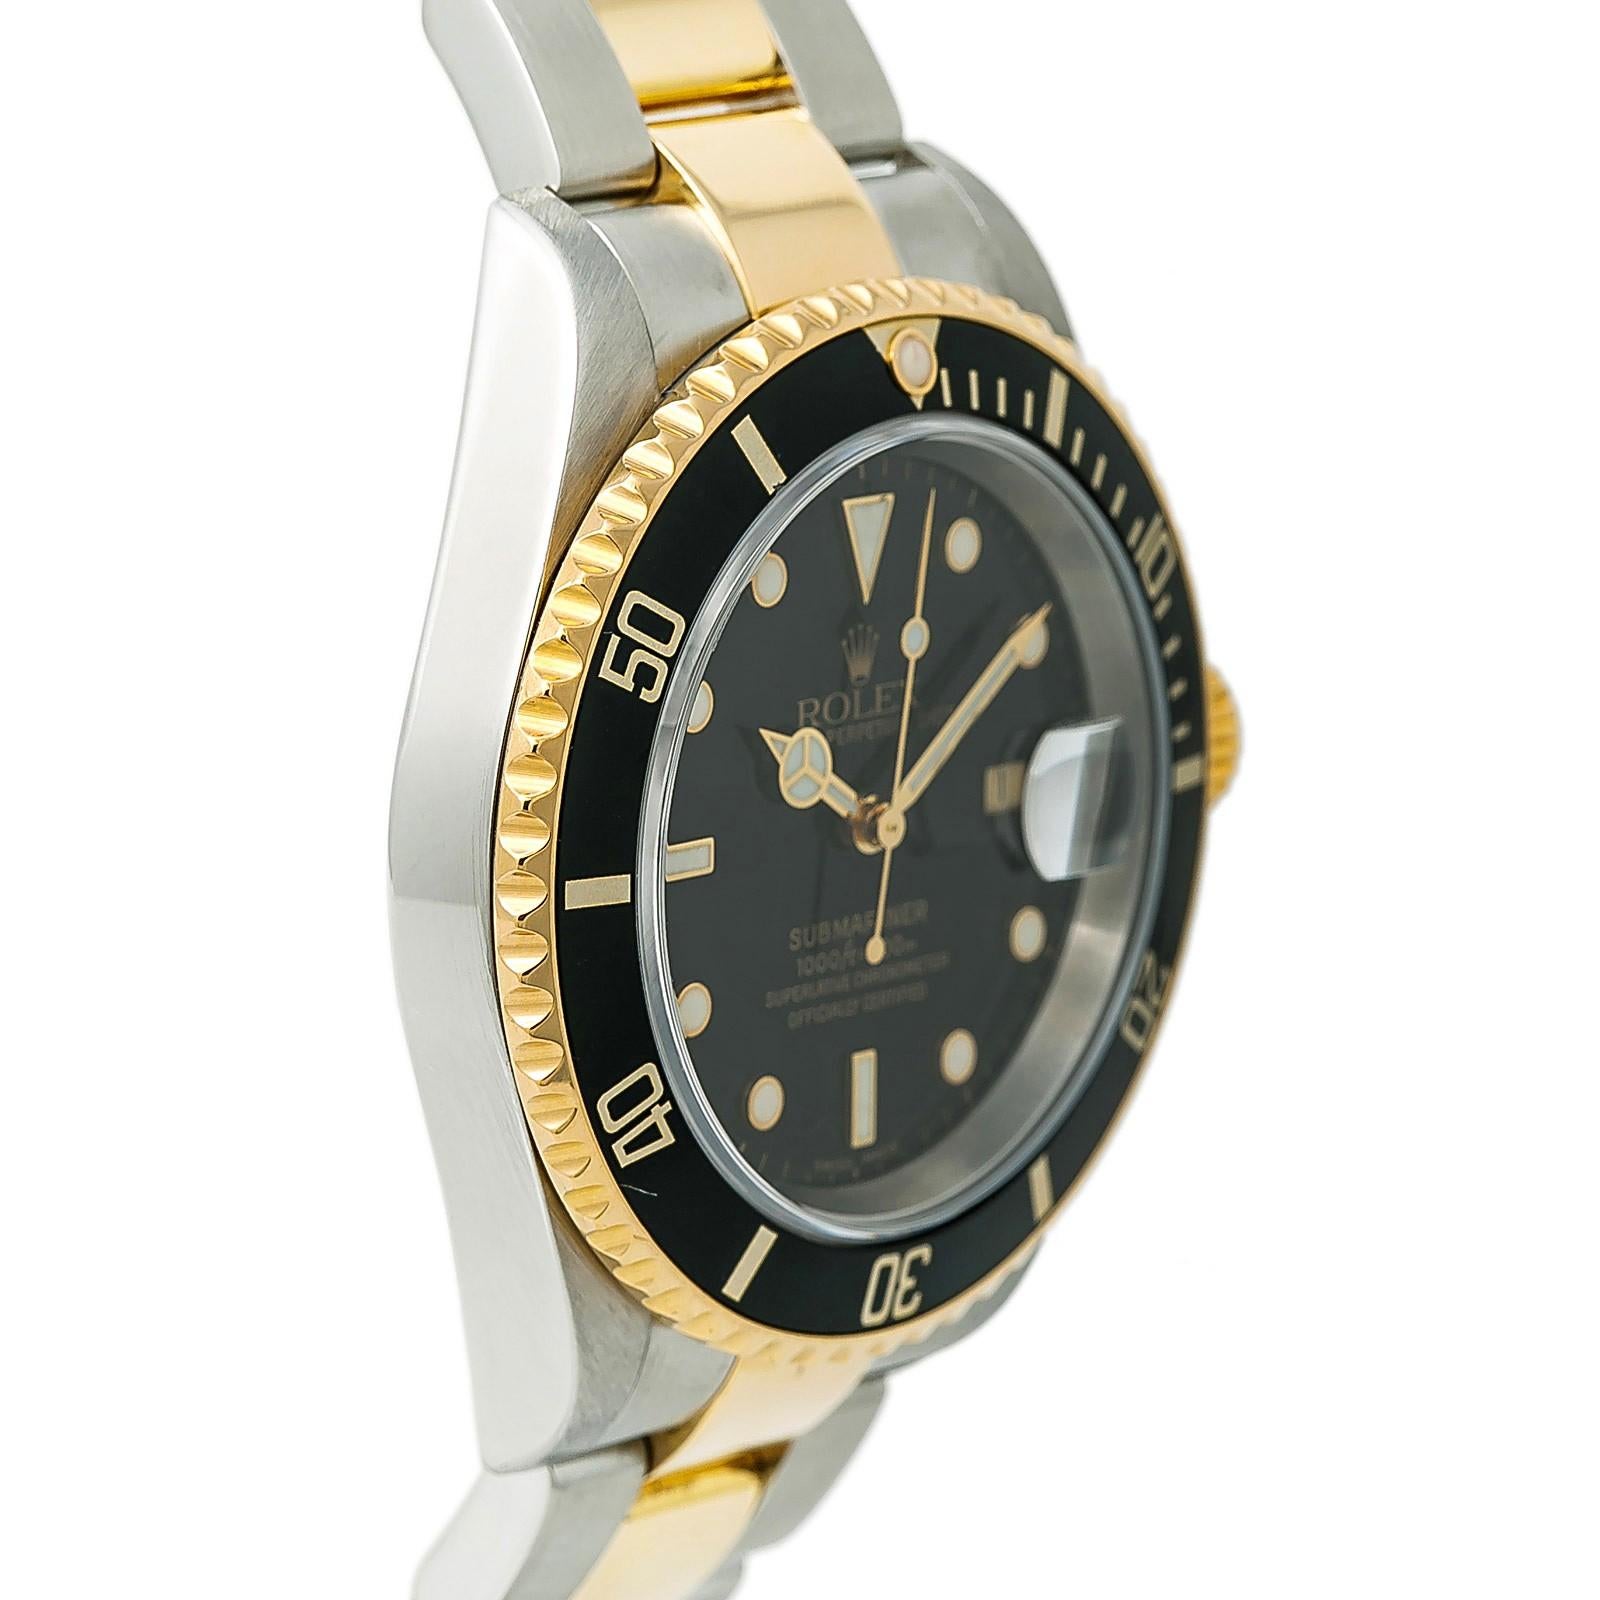 Rolex Submariner 16613 Men's Automatic Watch Black Dial Two-Tone Gold Buckle In Excellent Condition For Sale In Miami, FL